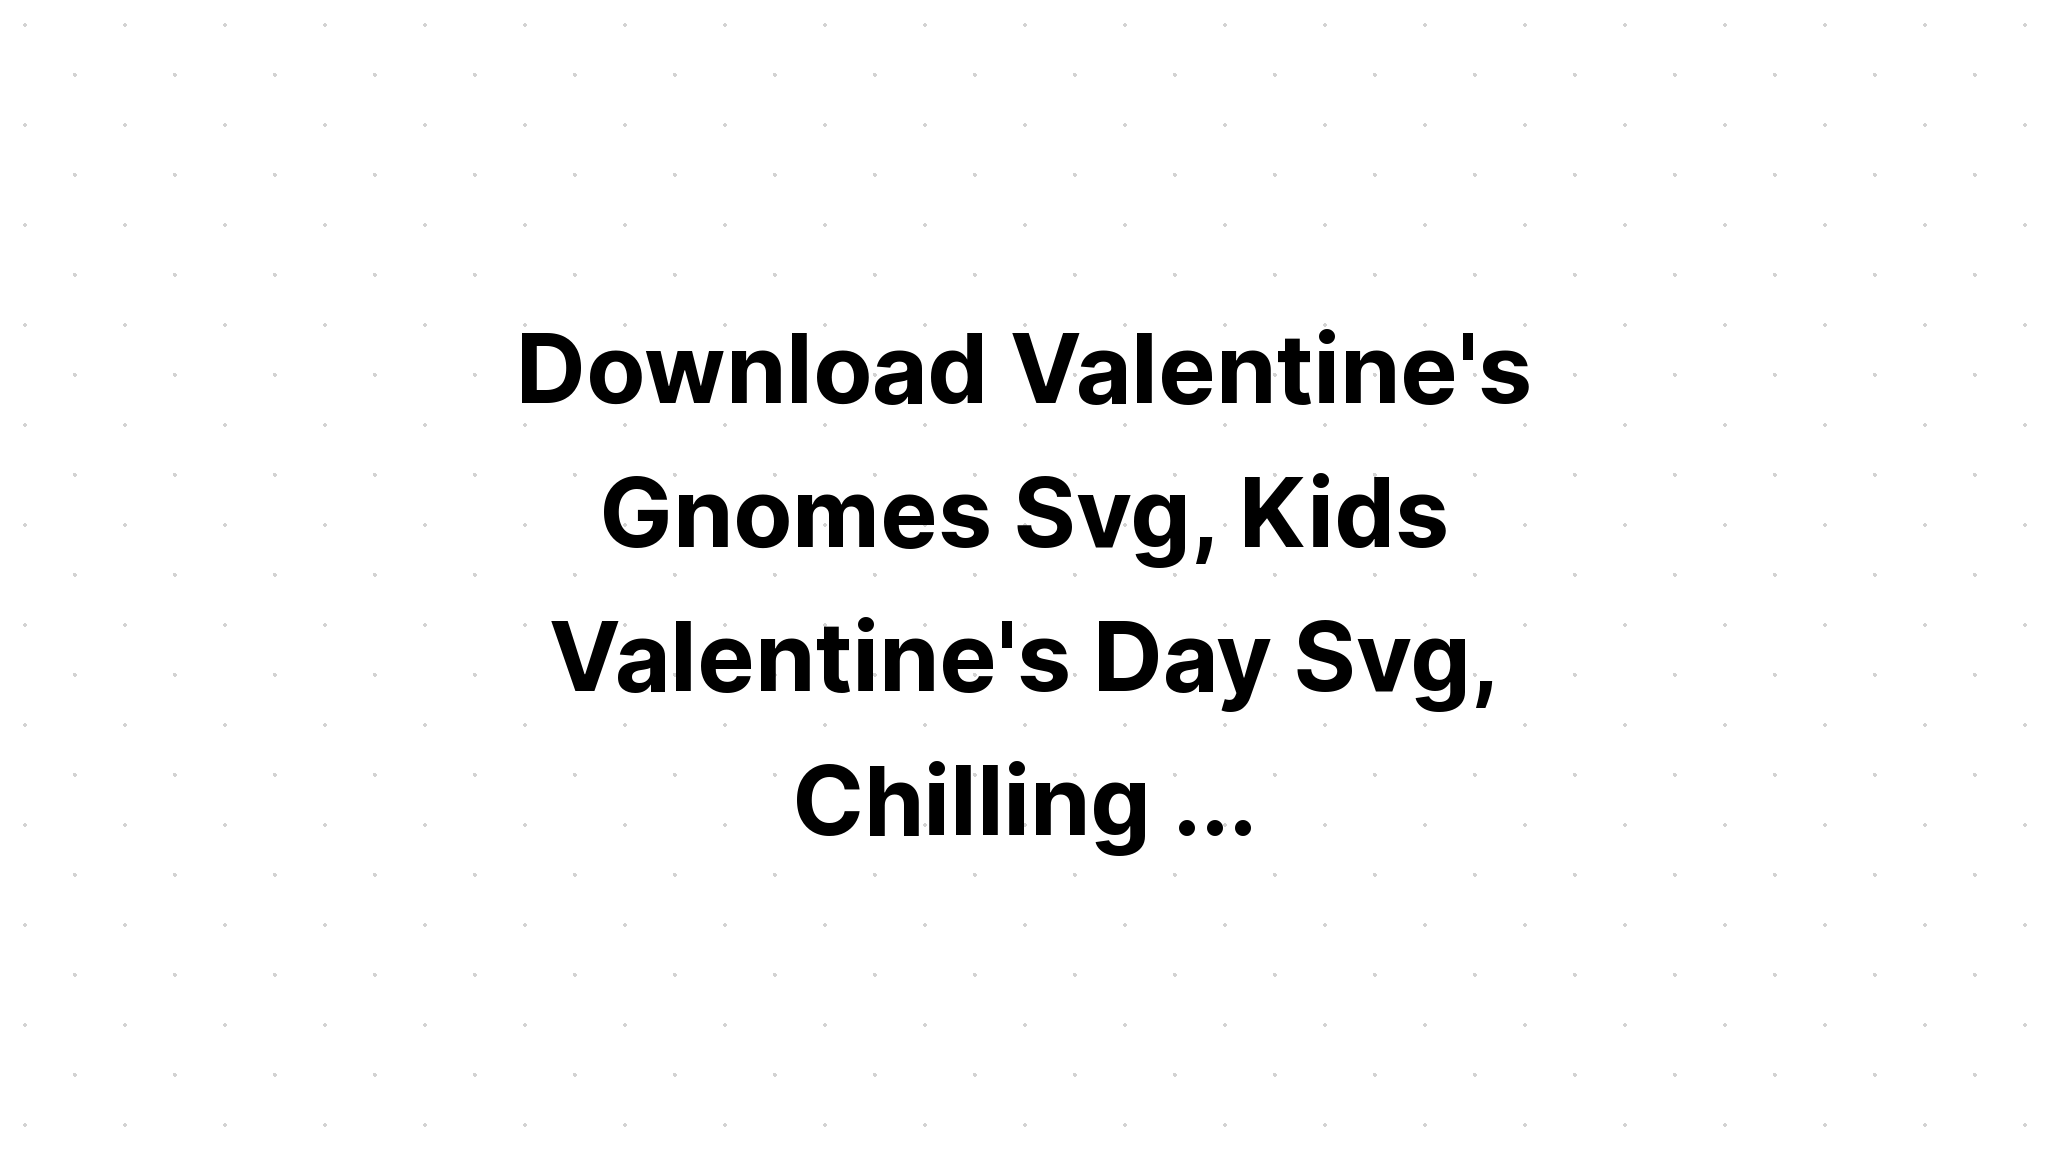 Download Etsy Gnomes Svg For Valentines Day - Layered SVG Cut File